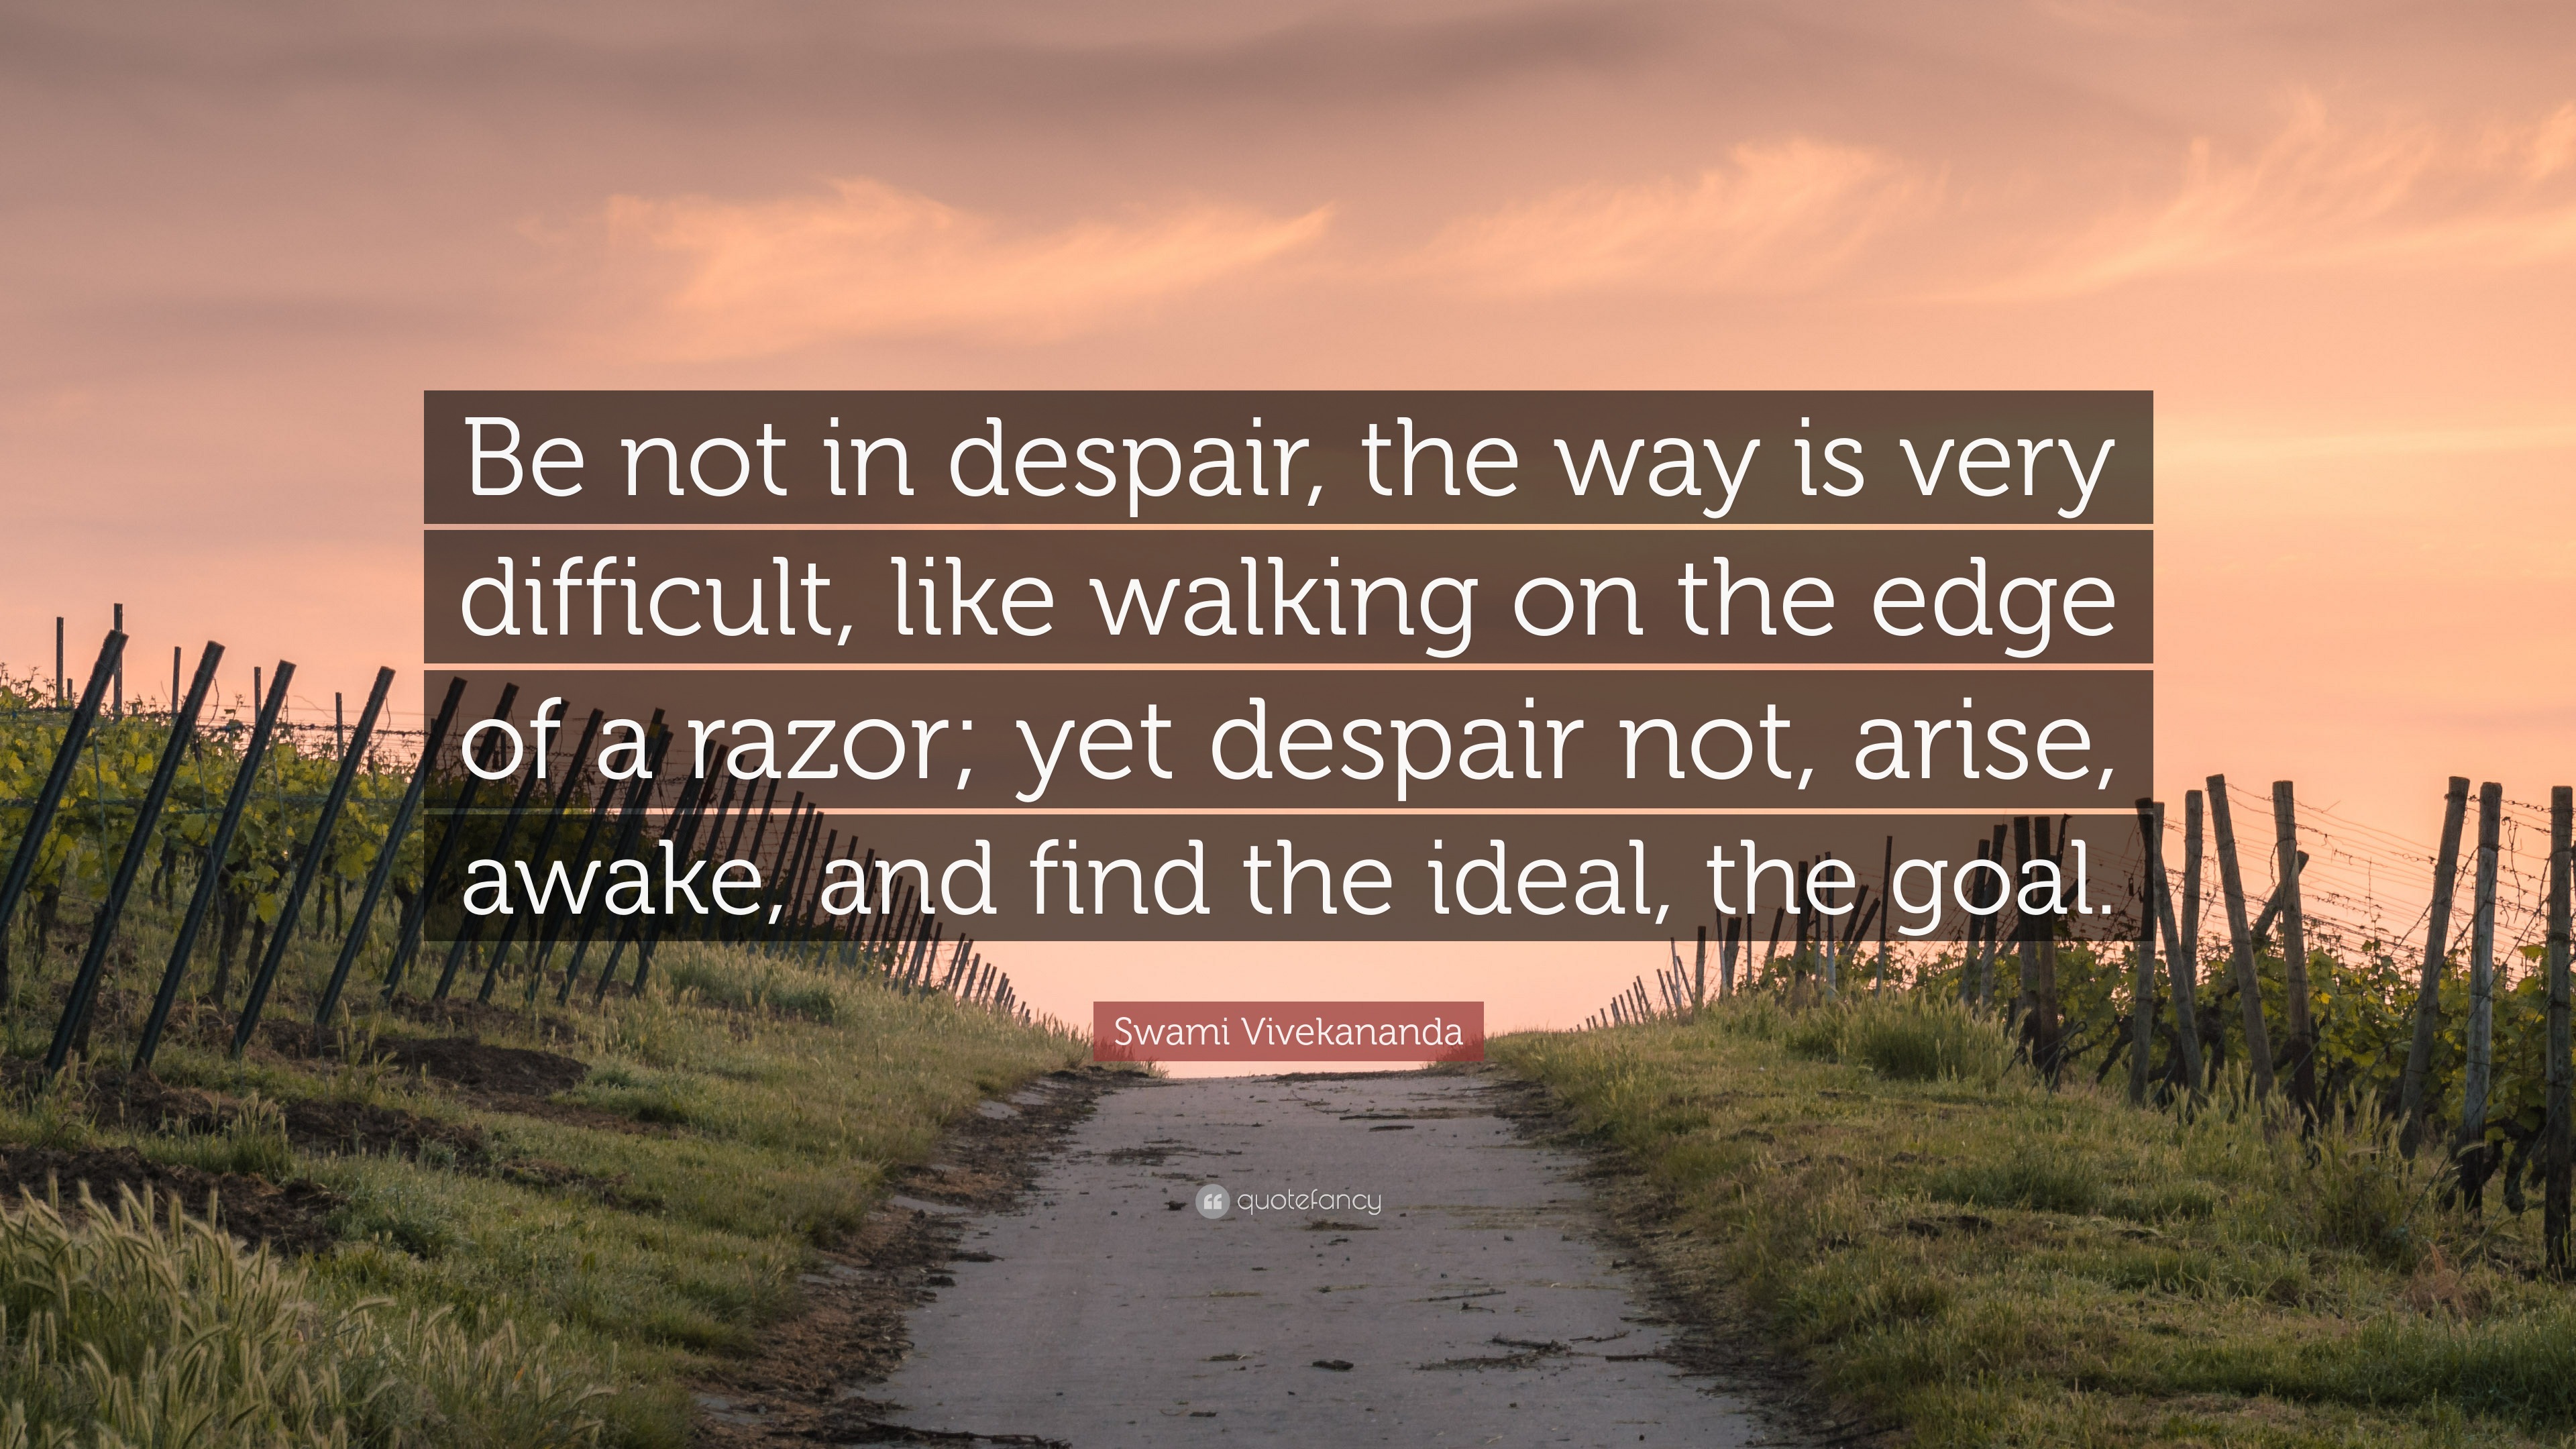 Swami Vivekananda Quote: “Be not in despair, the way is very difficult ...